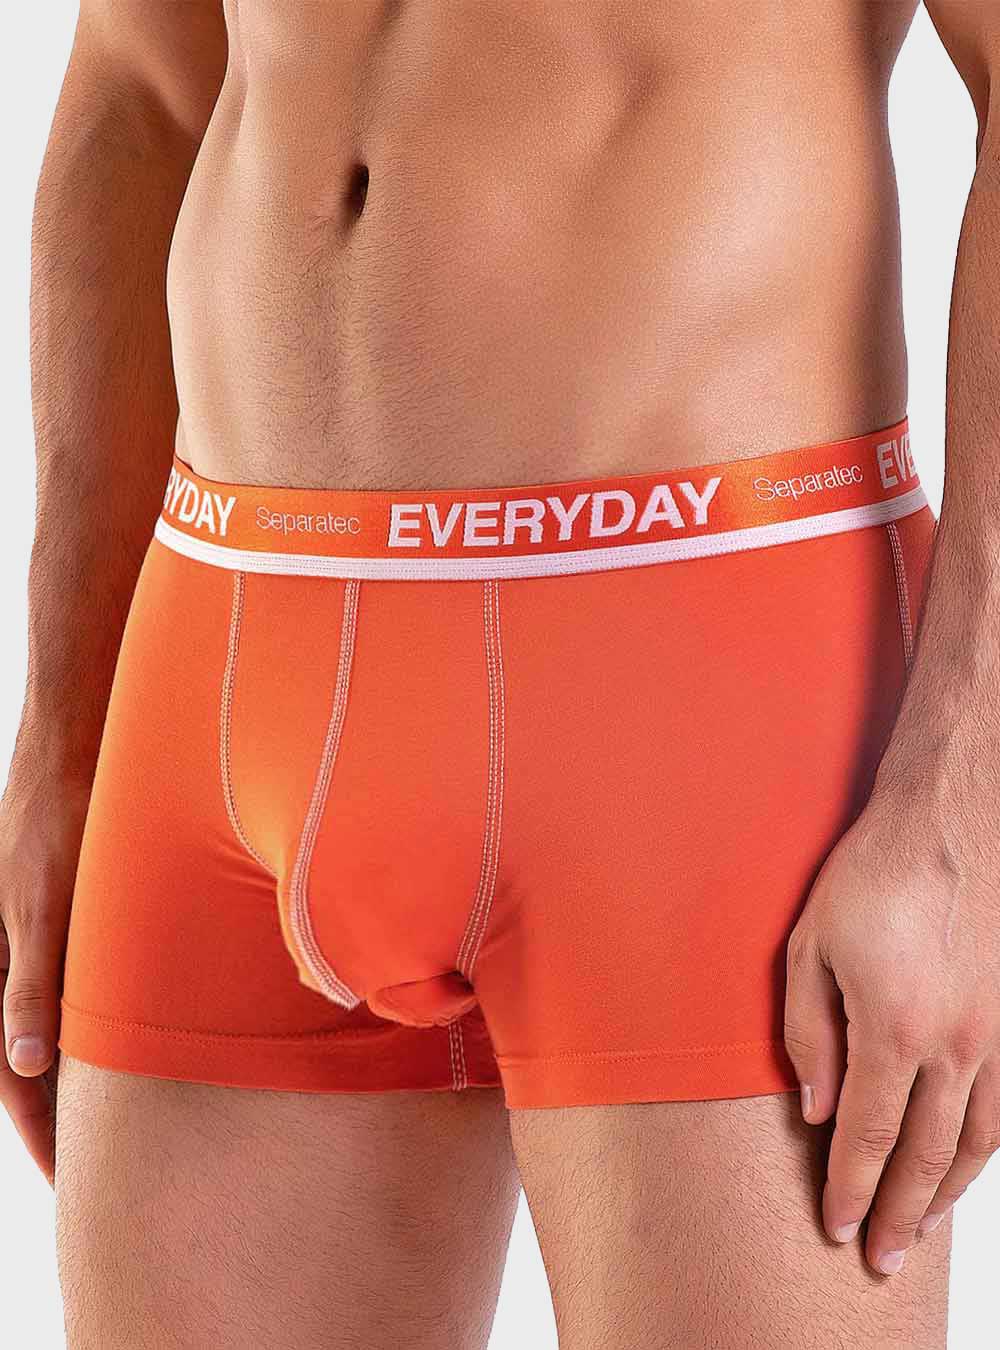 Colorful Everyday Trunks/Cotton 7Pack